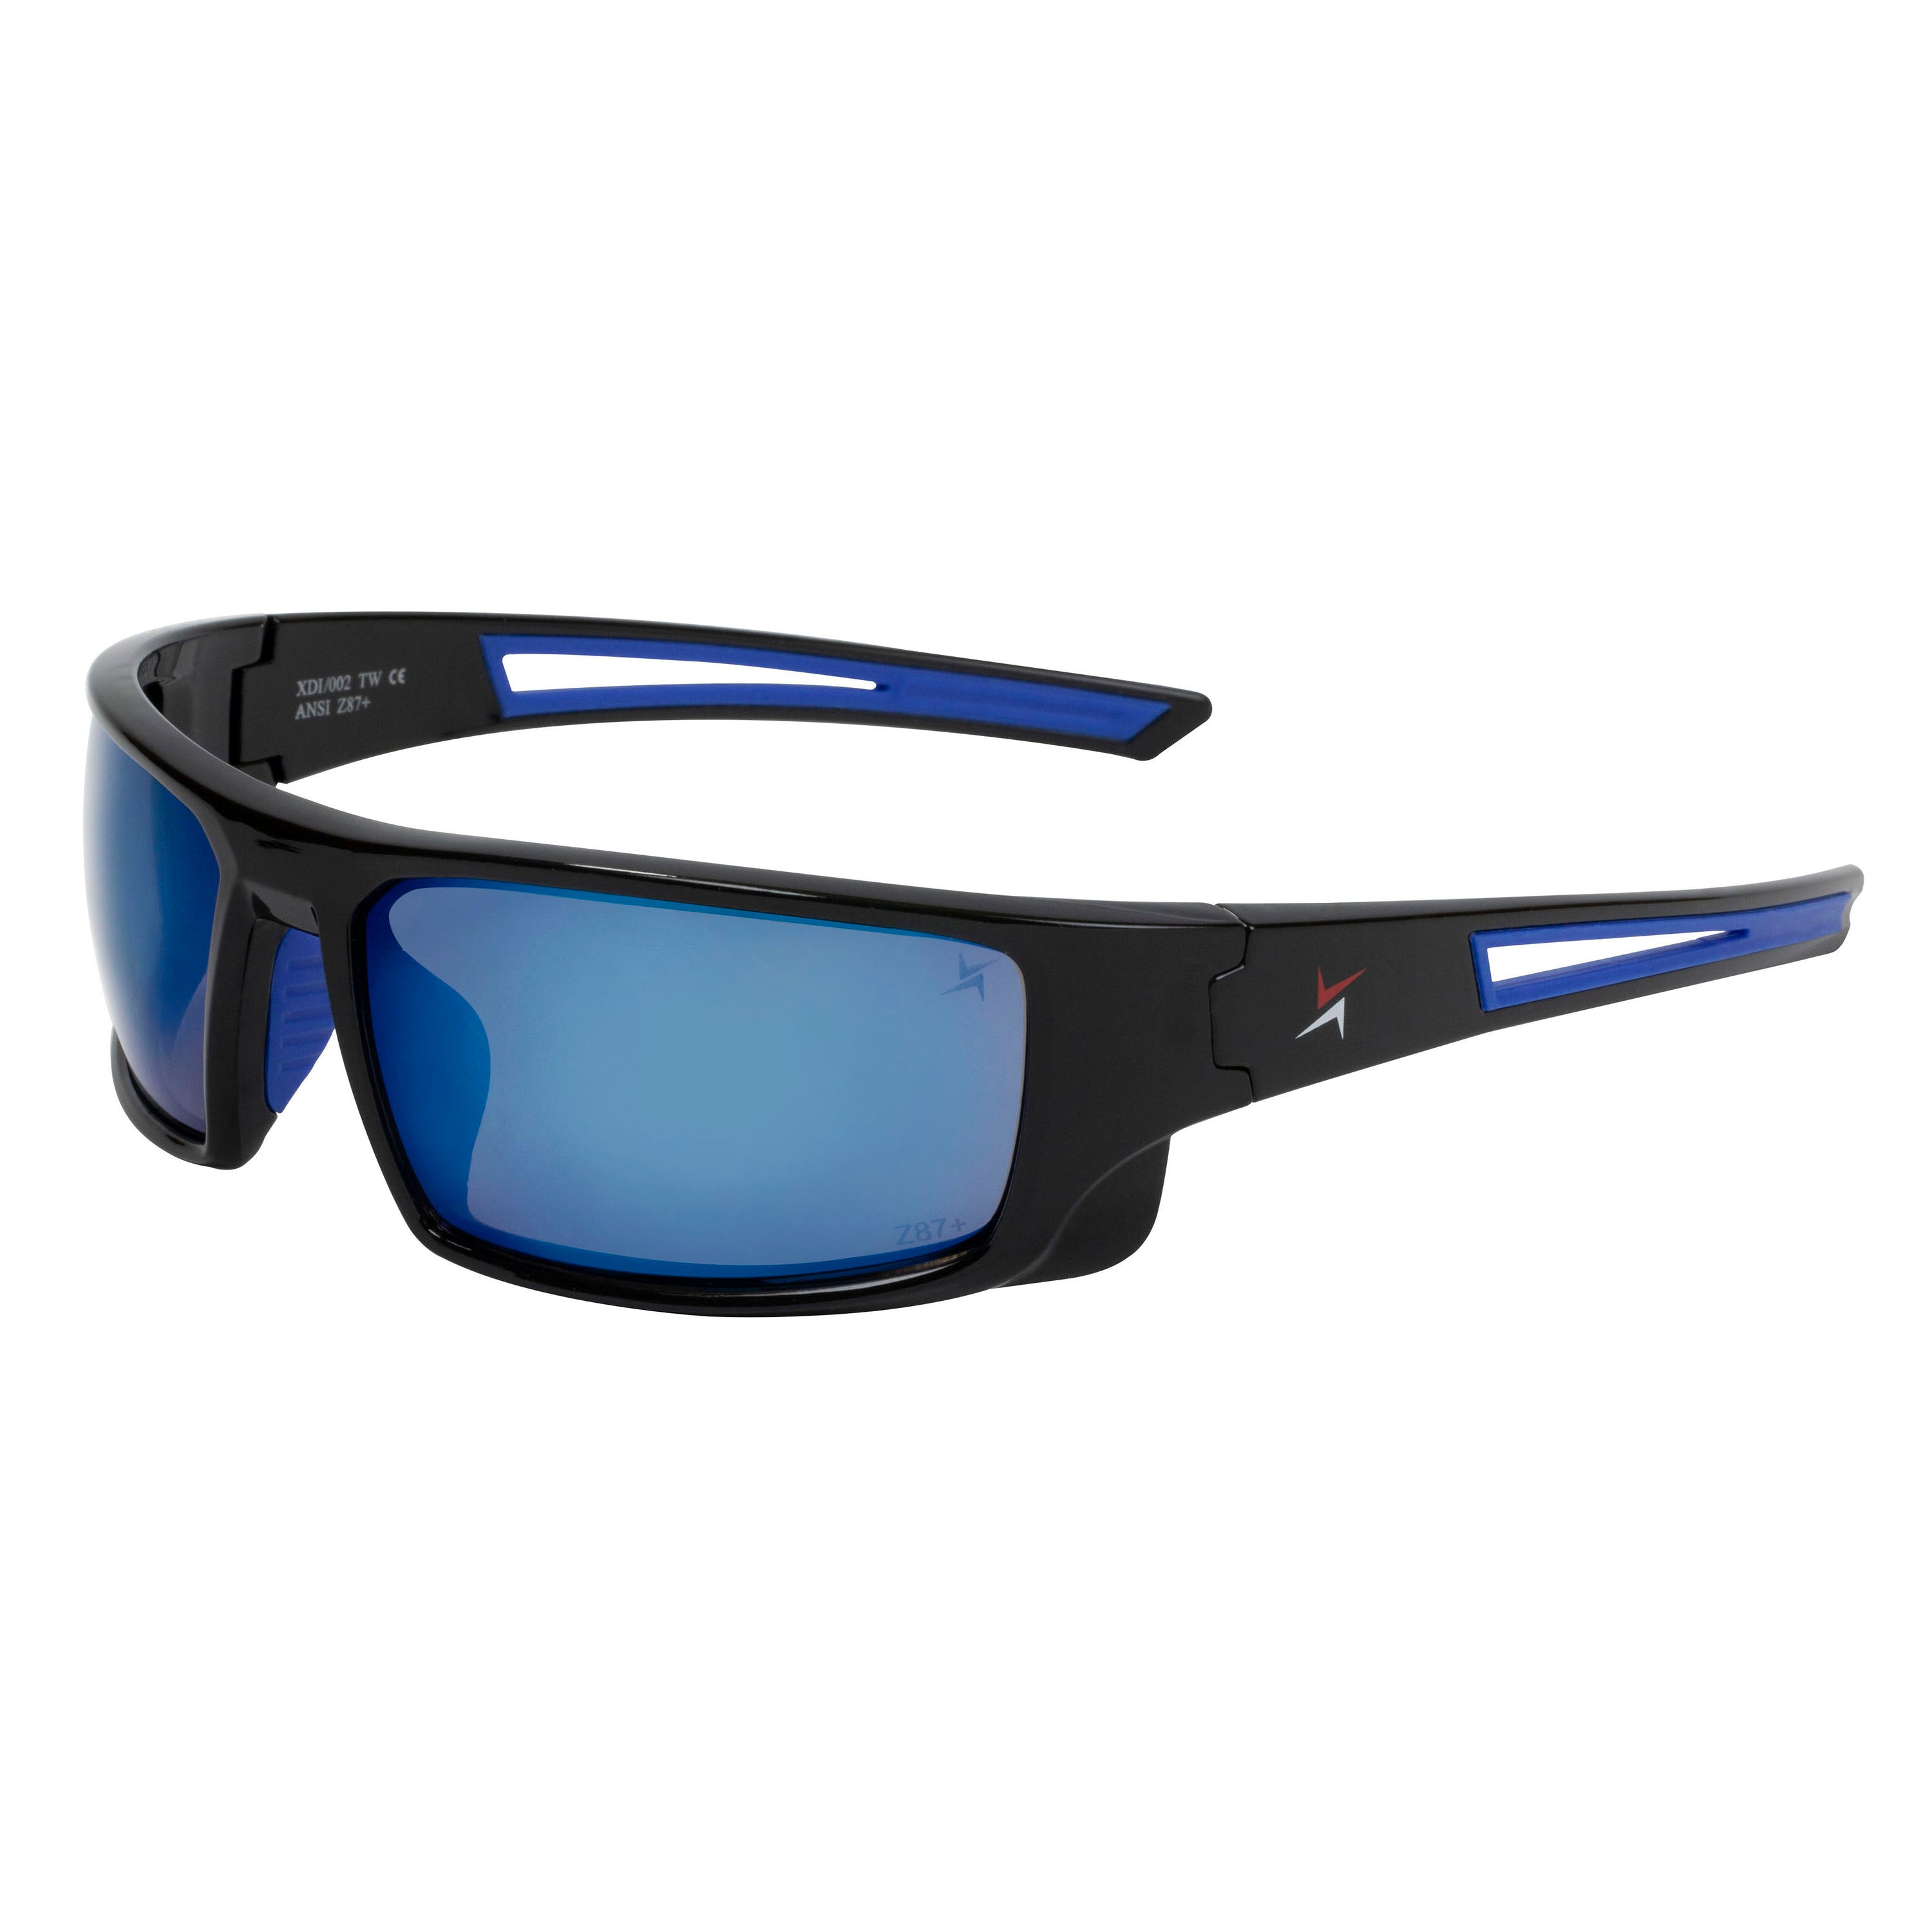 Blue Mirror Lens Sport Safety Sunglasses with Blue Rubber Accents.